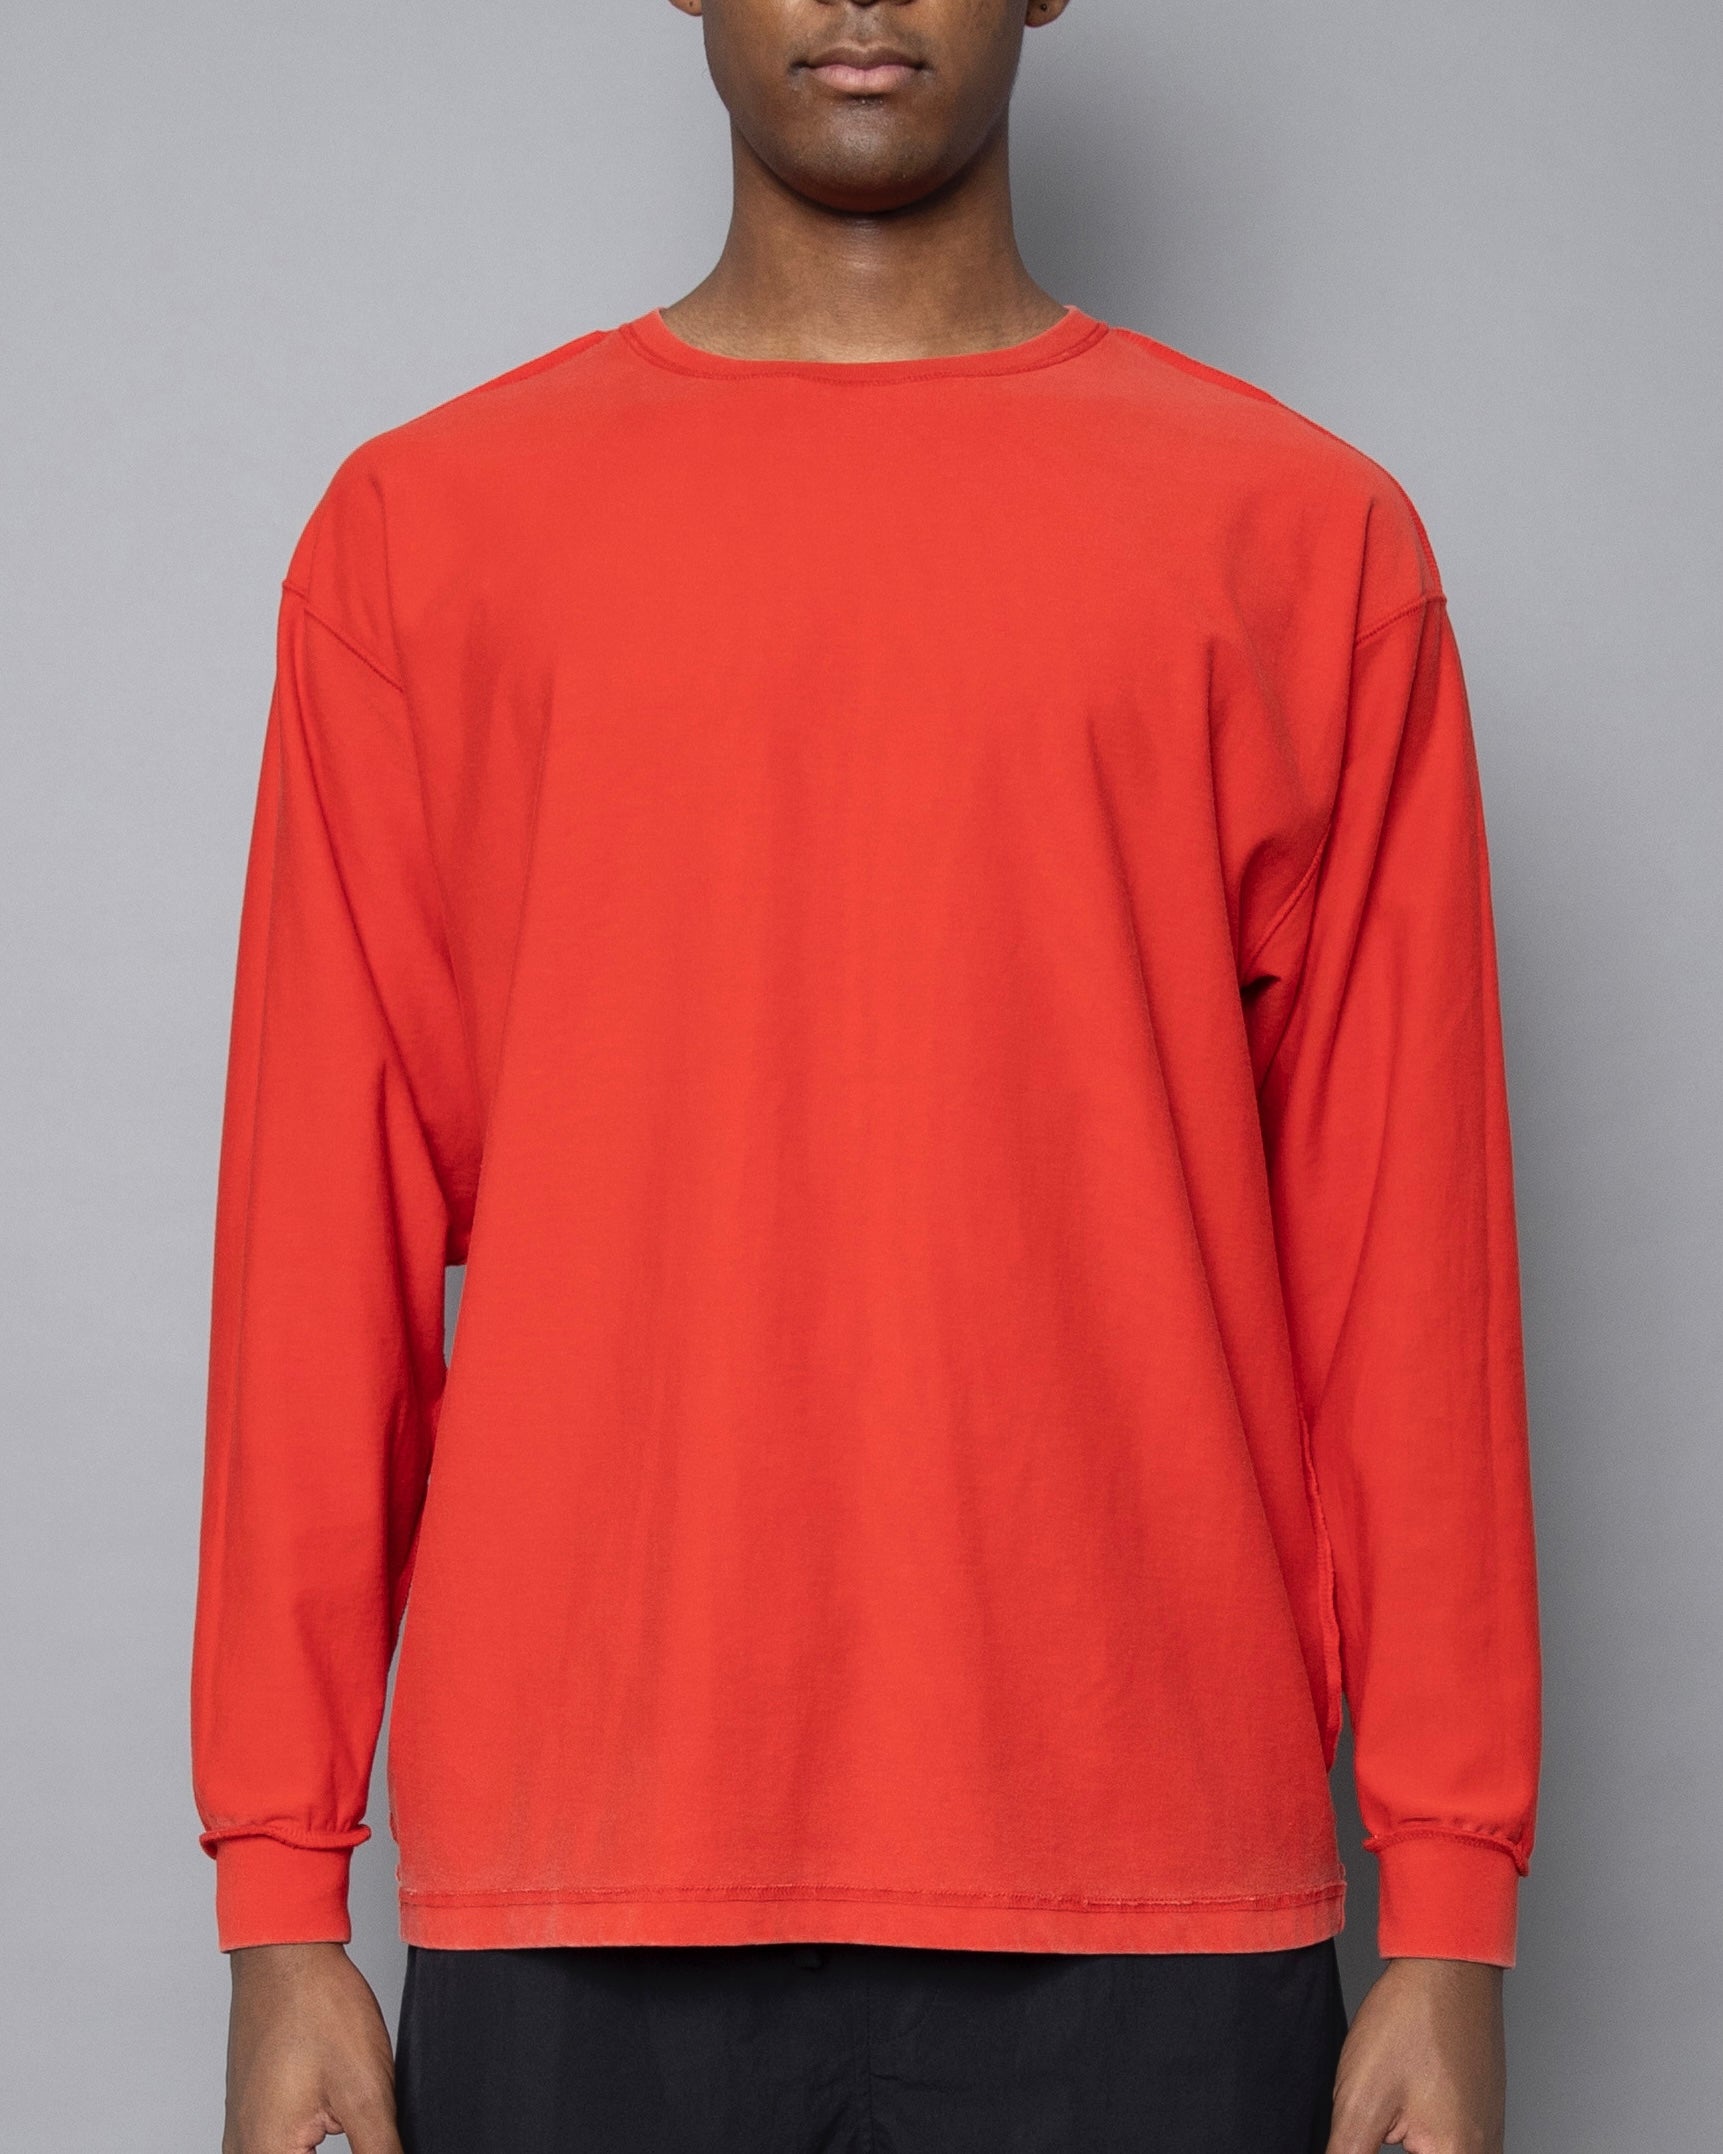 POWER DEPARTMENT LONG SLEEVE T-SHIRTS RED – TAIN DOUBLEPUSH